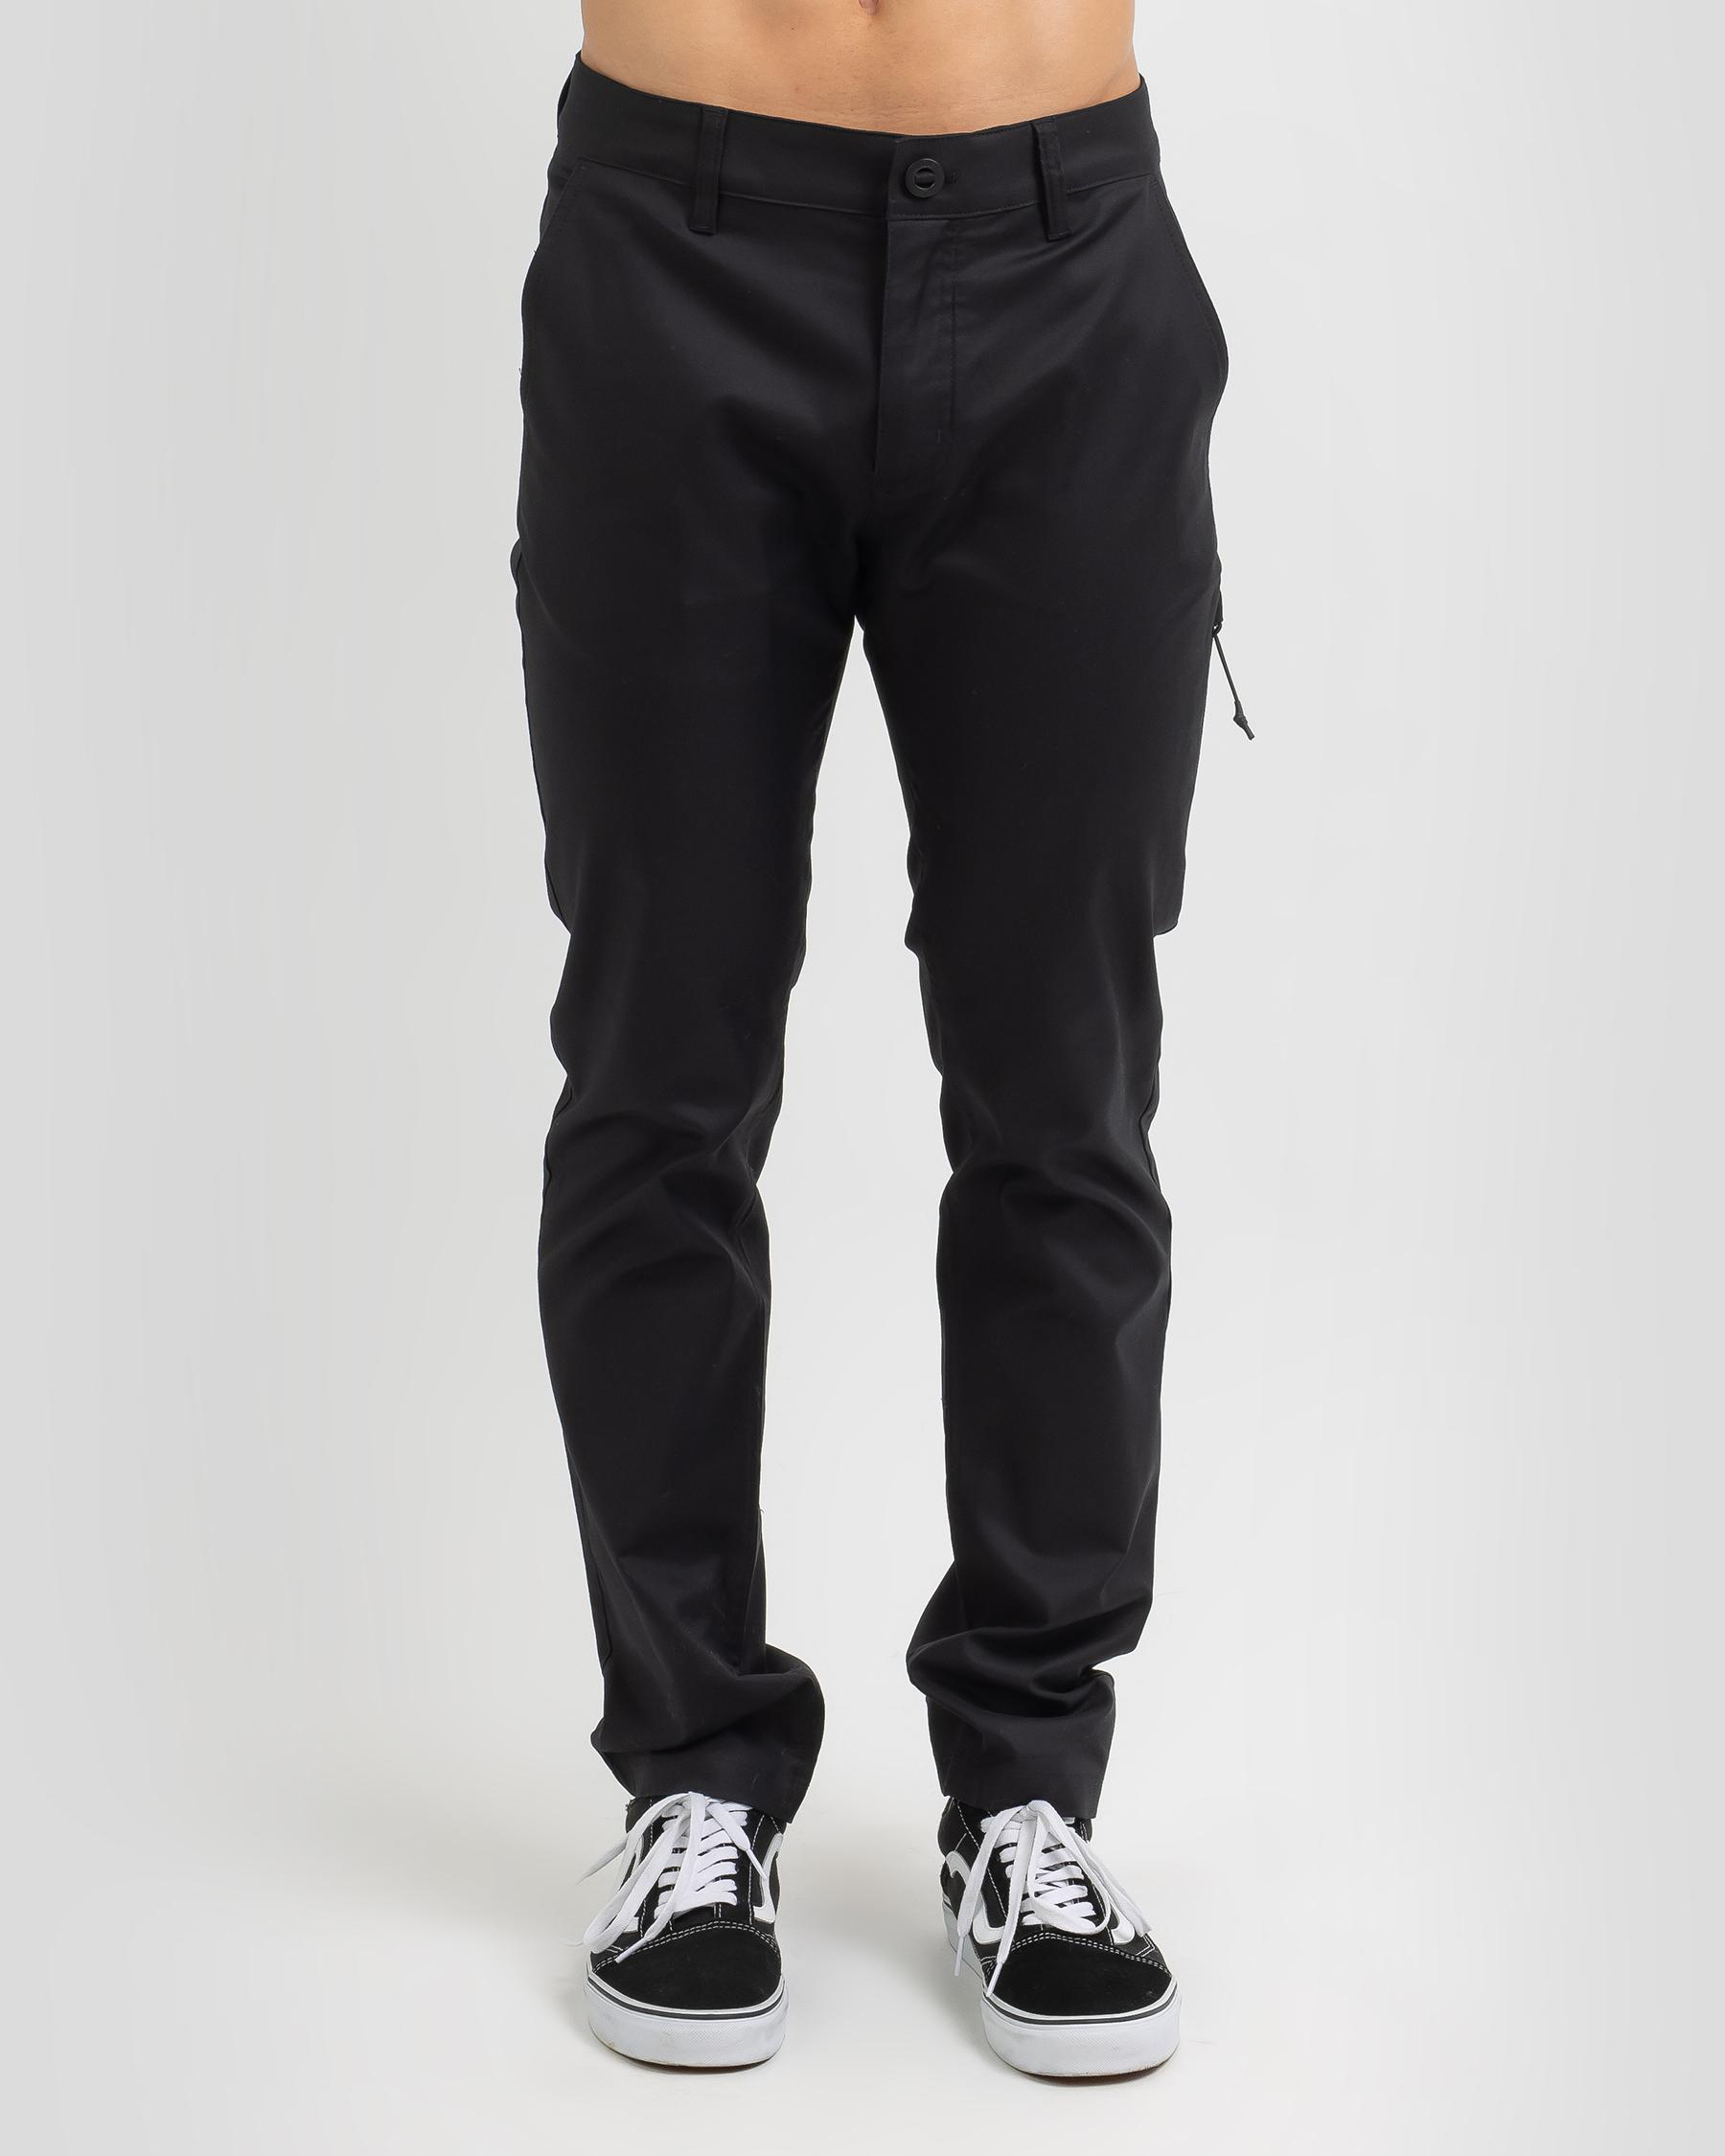 Fox Essex Stretch Pants In Black - Fast Shipping & Easy Returns - City ...